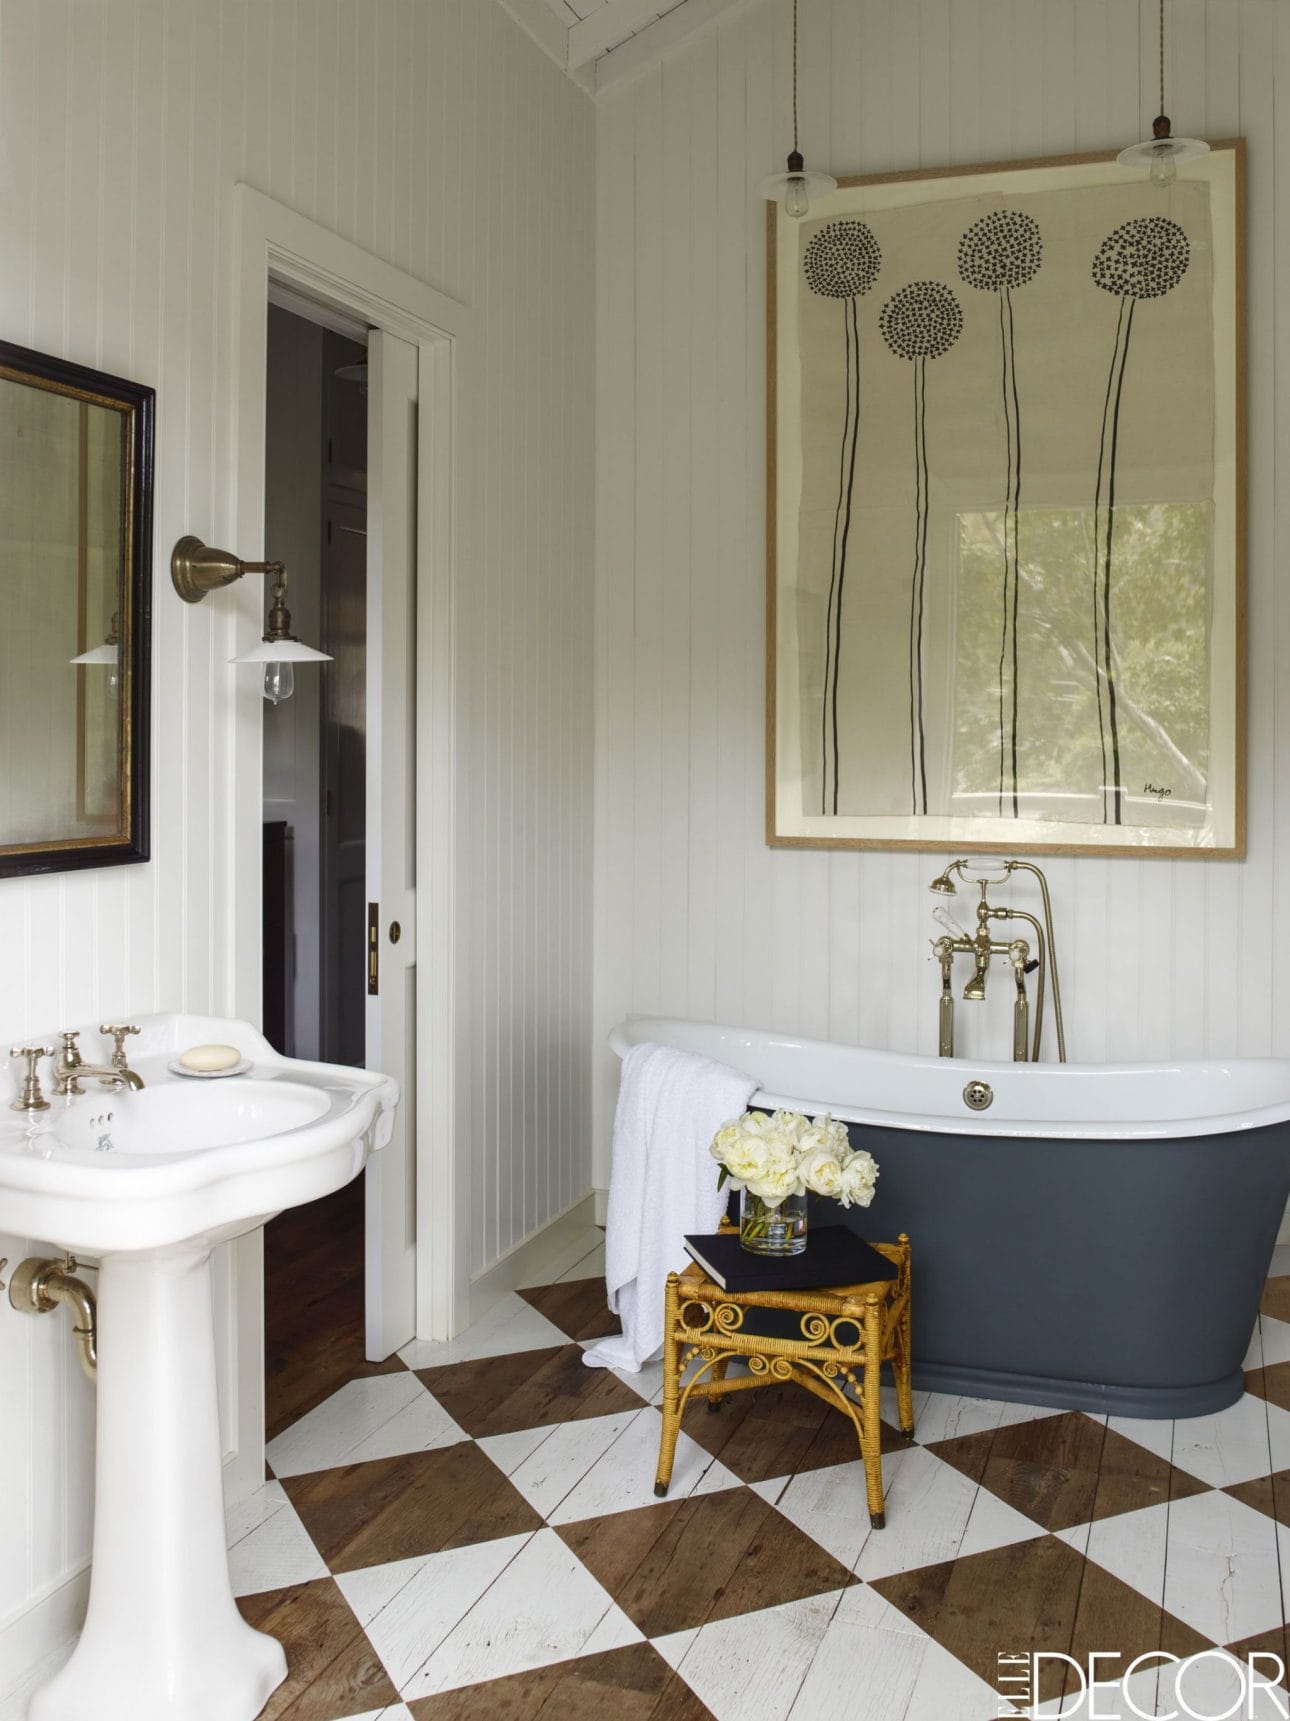 18 Rustic Bathroom Ideas That You Will Adore